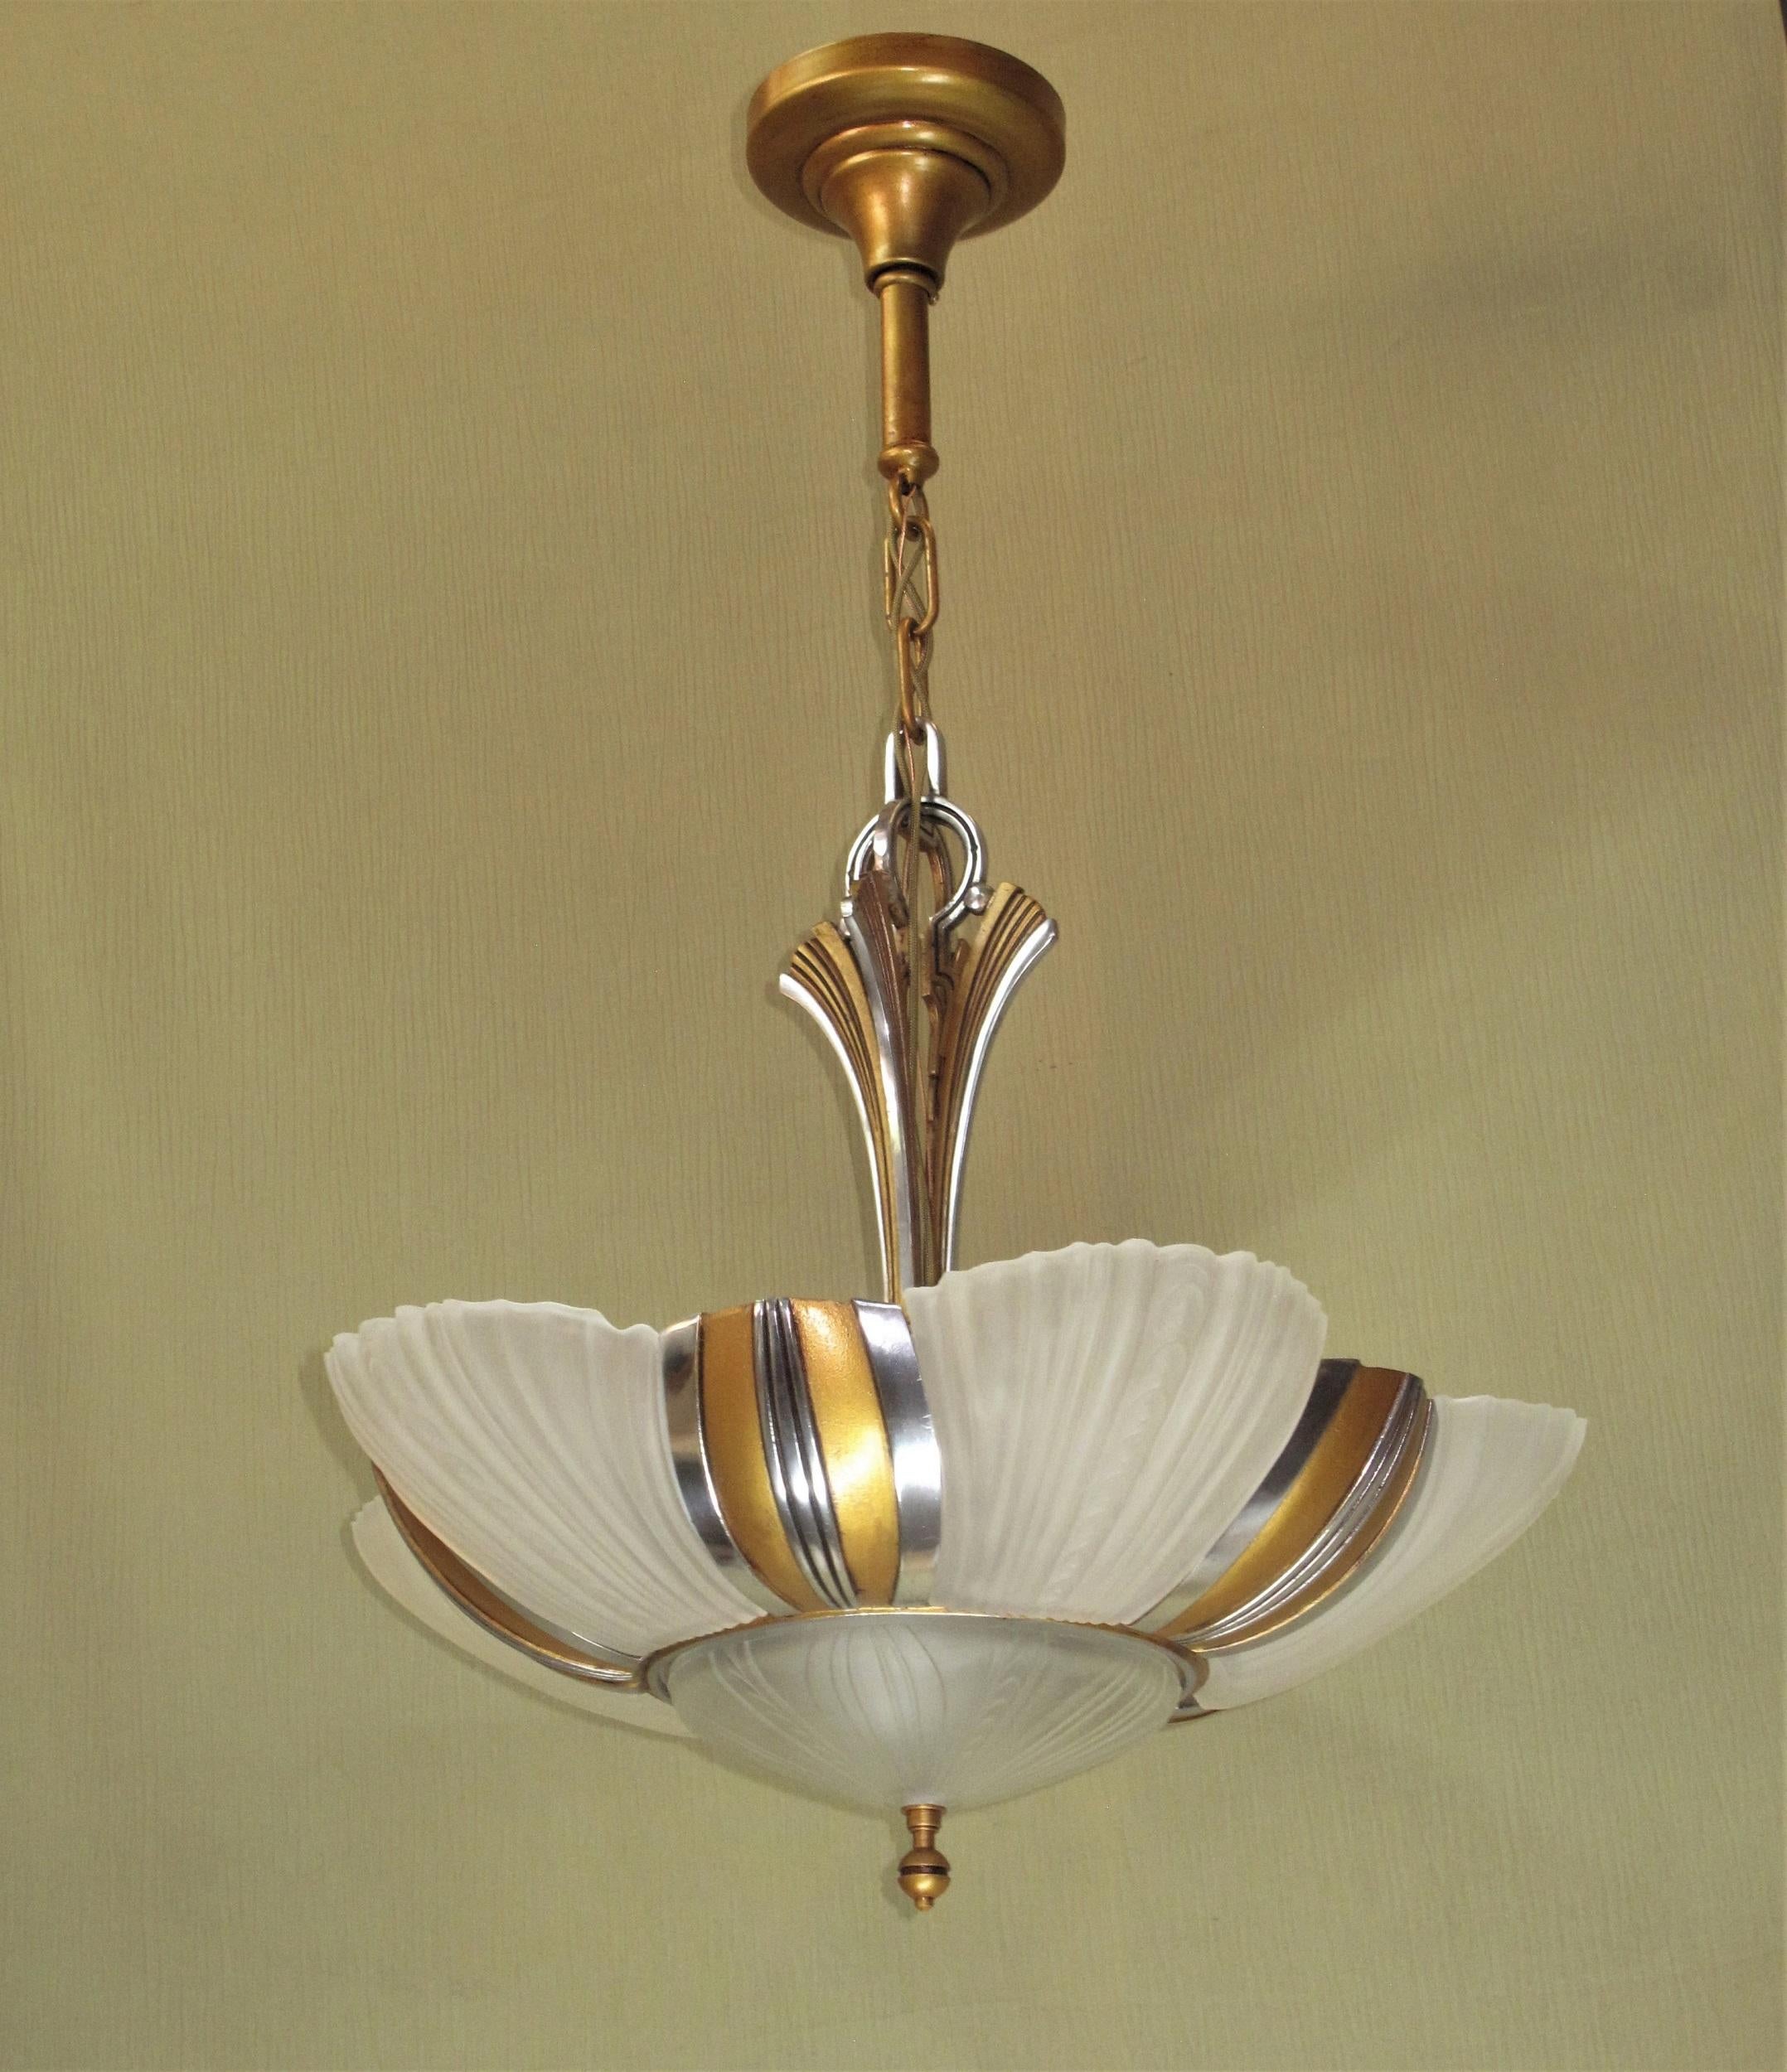 TWO Art Deco Mid Century 7 Bulb Restored Ceiling Fixture Priced each 1